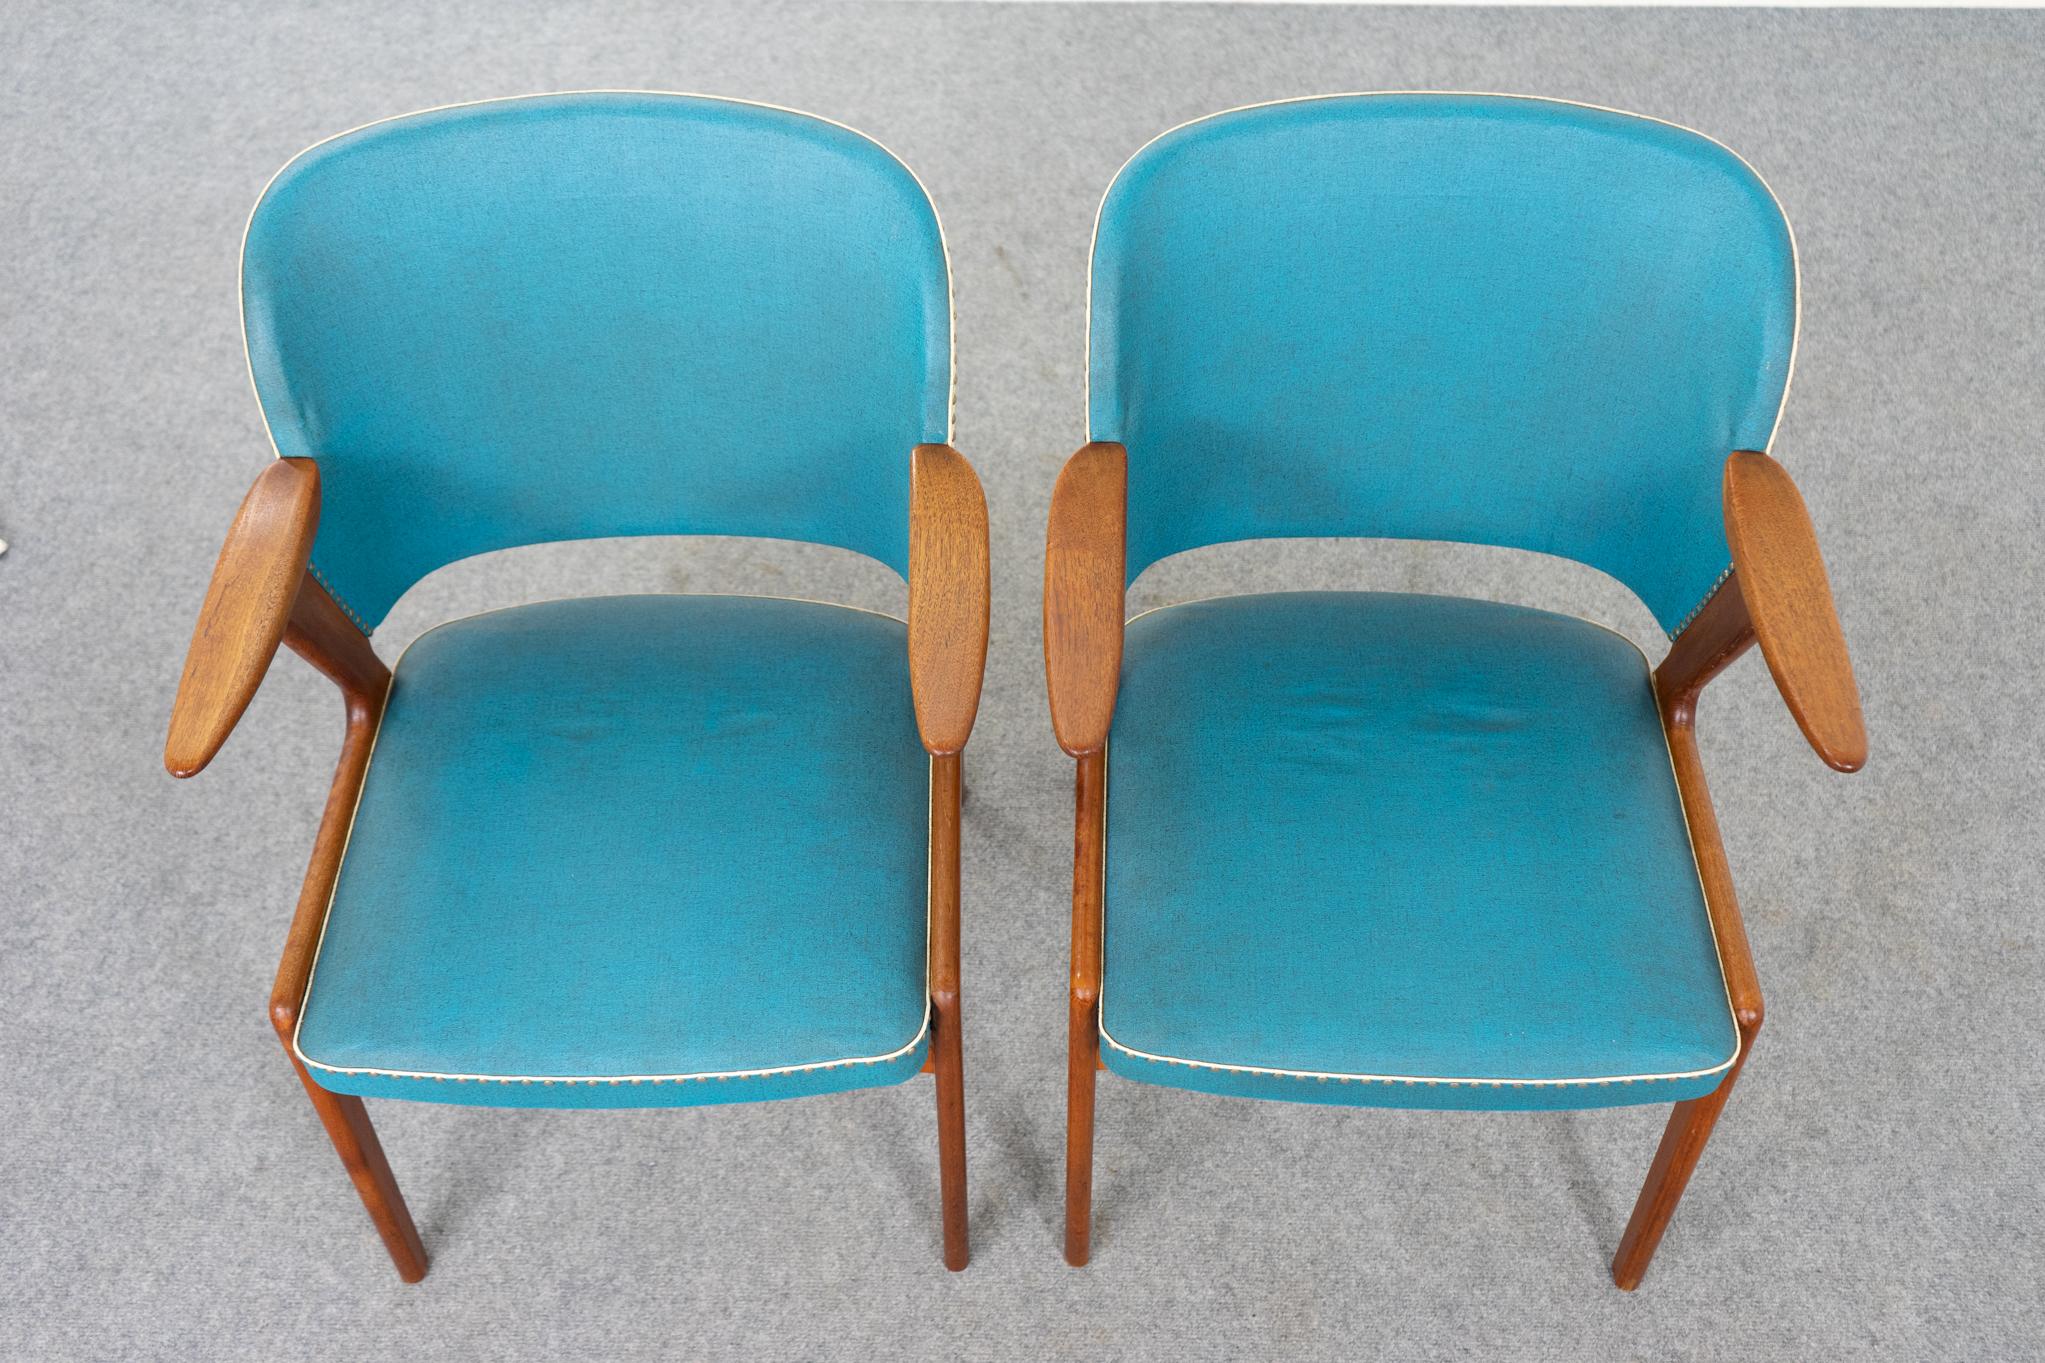 Pair of teak and vinyl Danish arm chairs, circa 1950's. Elegant frame with swooping arms is perfectly scaled for any room. Original contrasting teal and cream vinyl upholstery. Beautifully sculpted frame offers comfort without an imposing